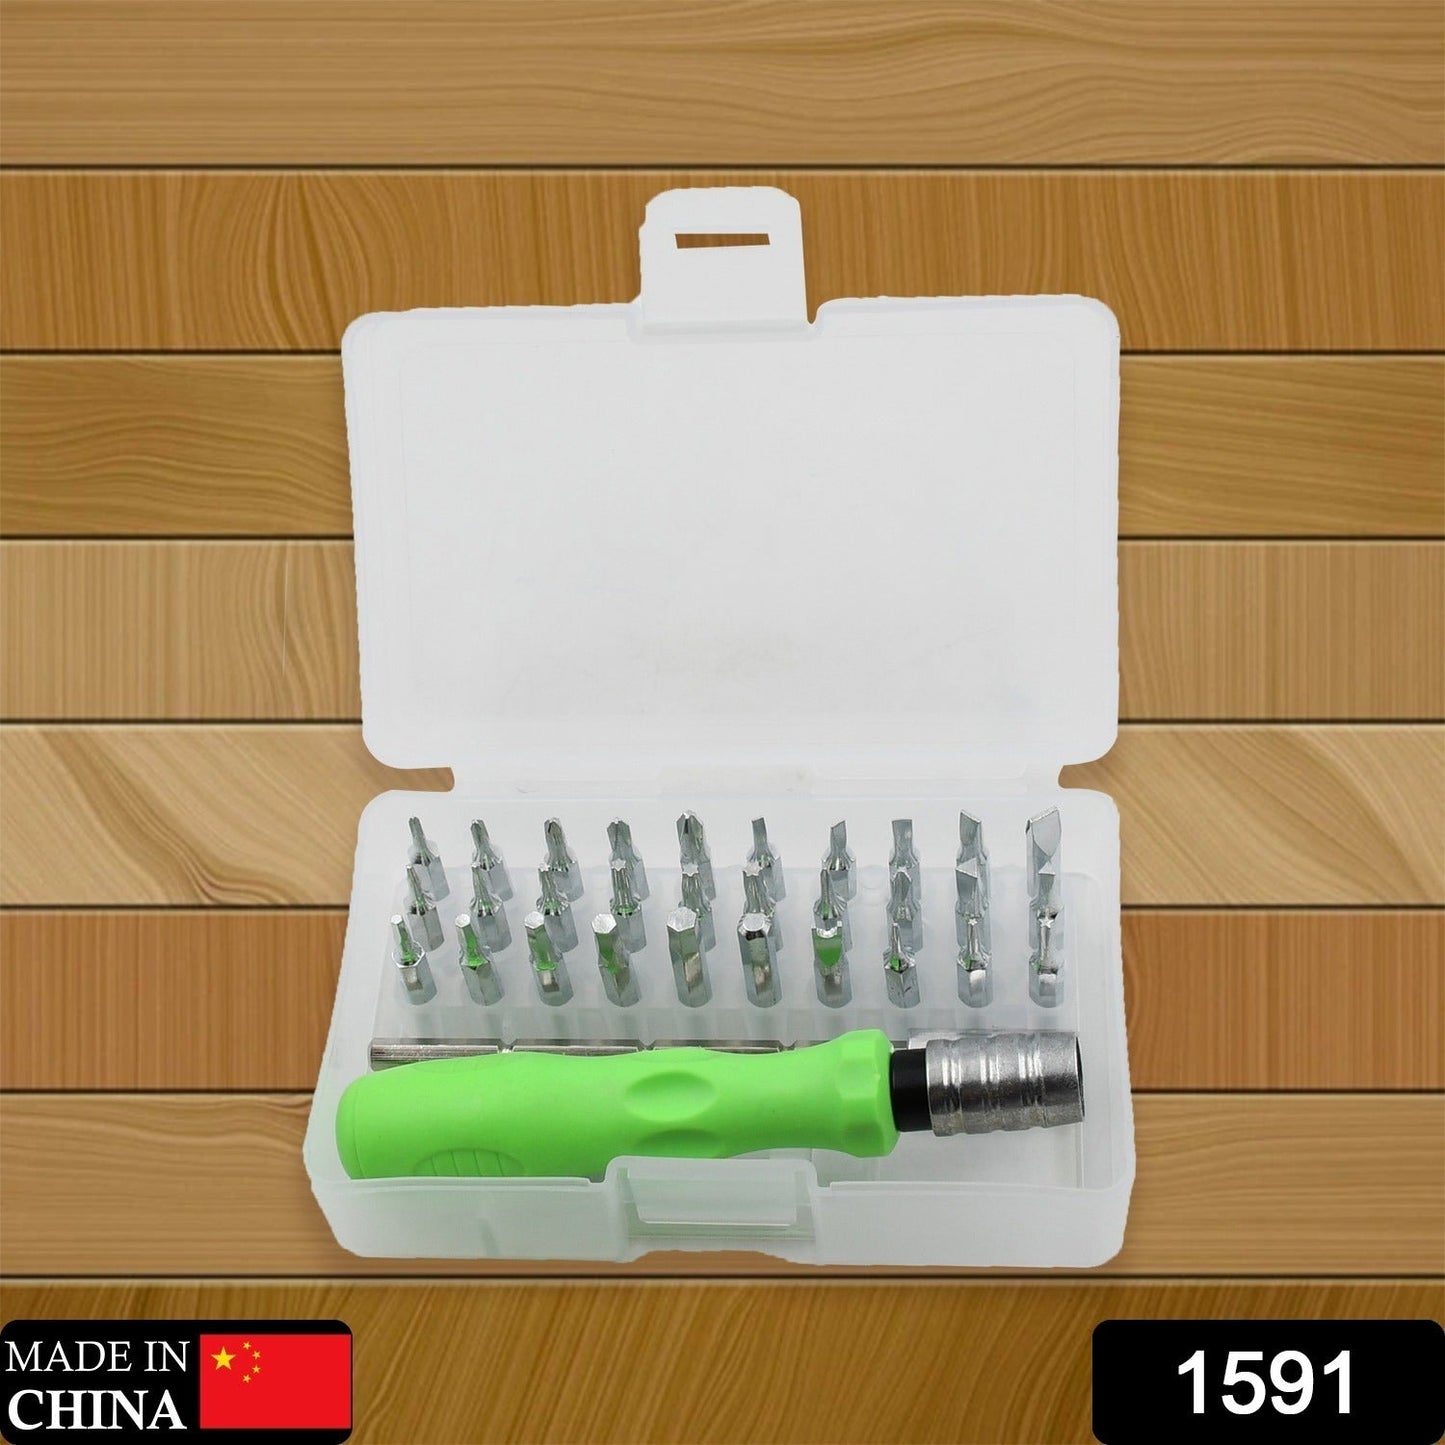 1591  30 IN 1 MINI SCREWDRIVER BITS SET WITH MAGNETIC FLEXIBLE EXTENSION ROD